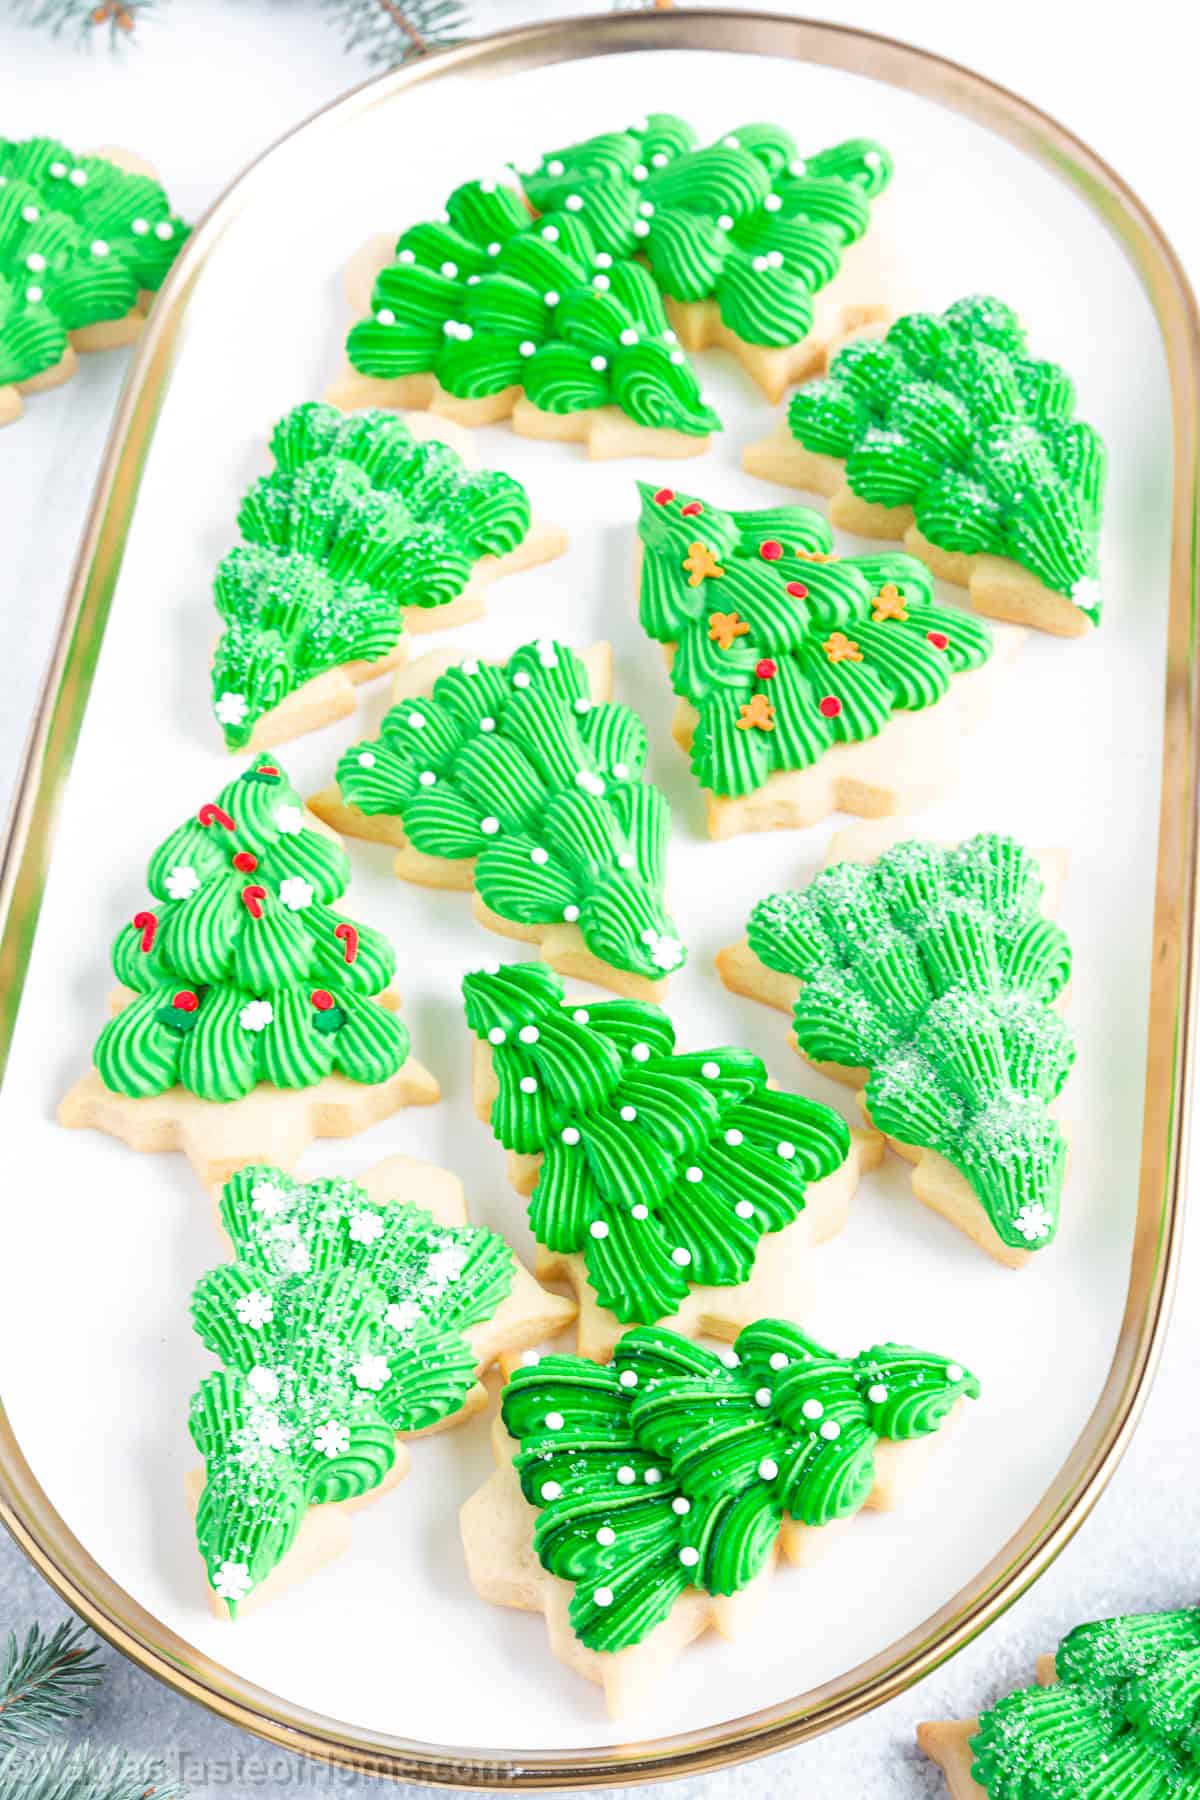 Making these Christmas tree sugar cookies at home is a fun and creative activity.